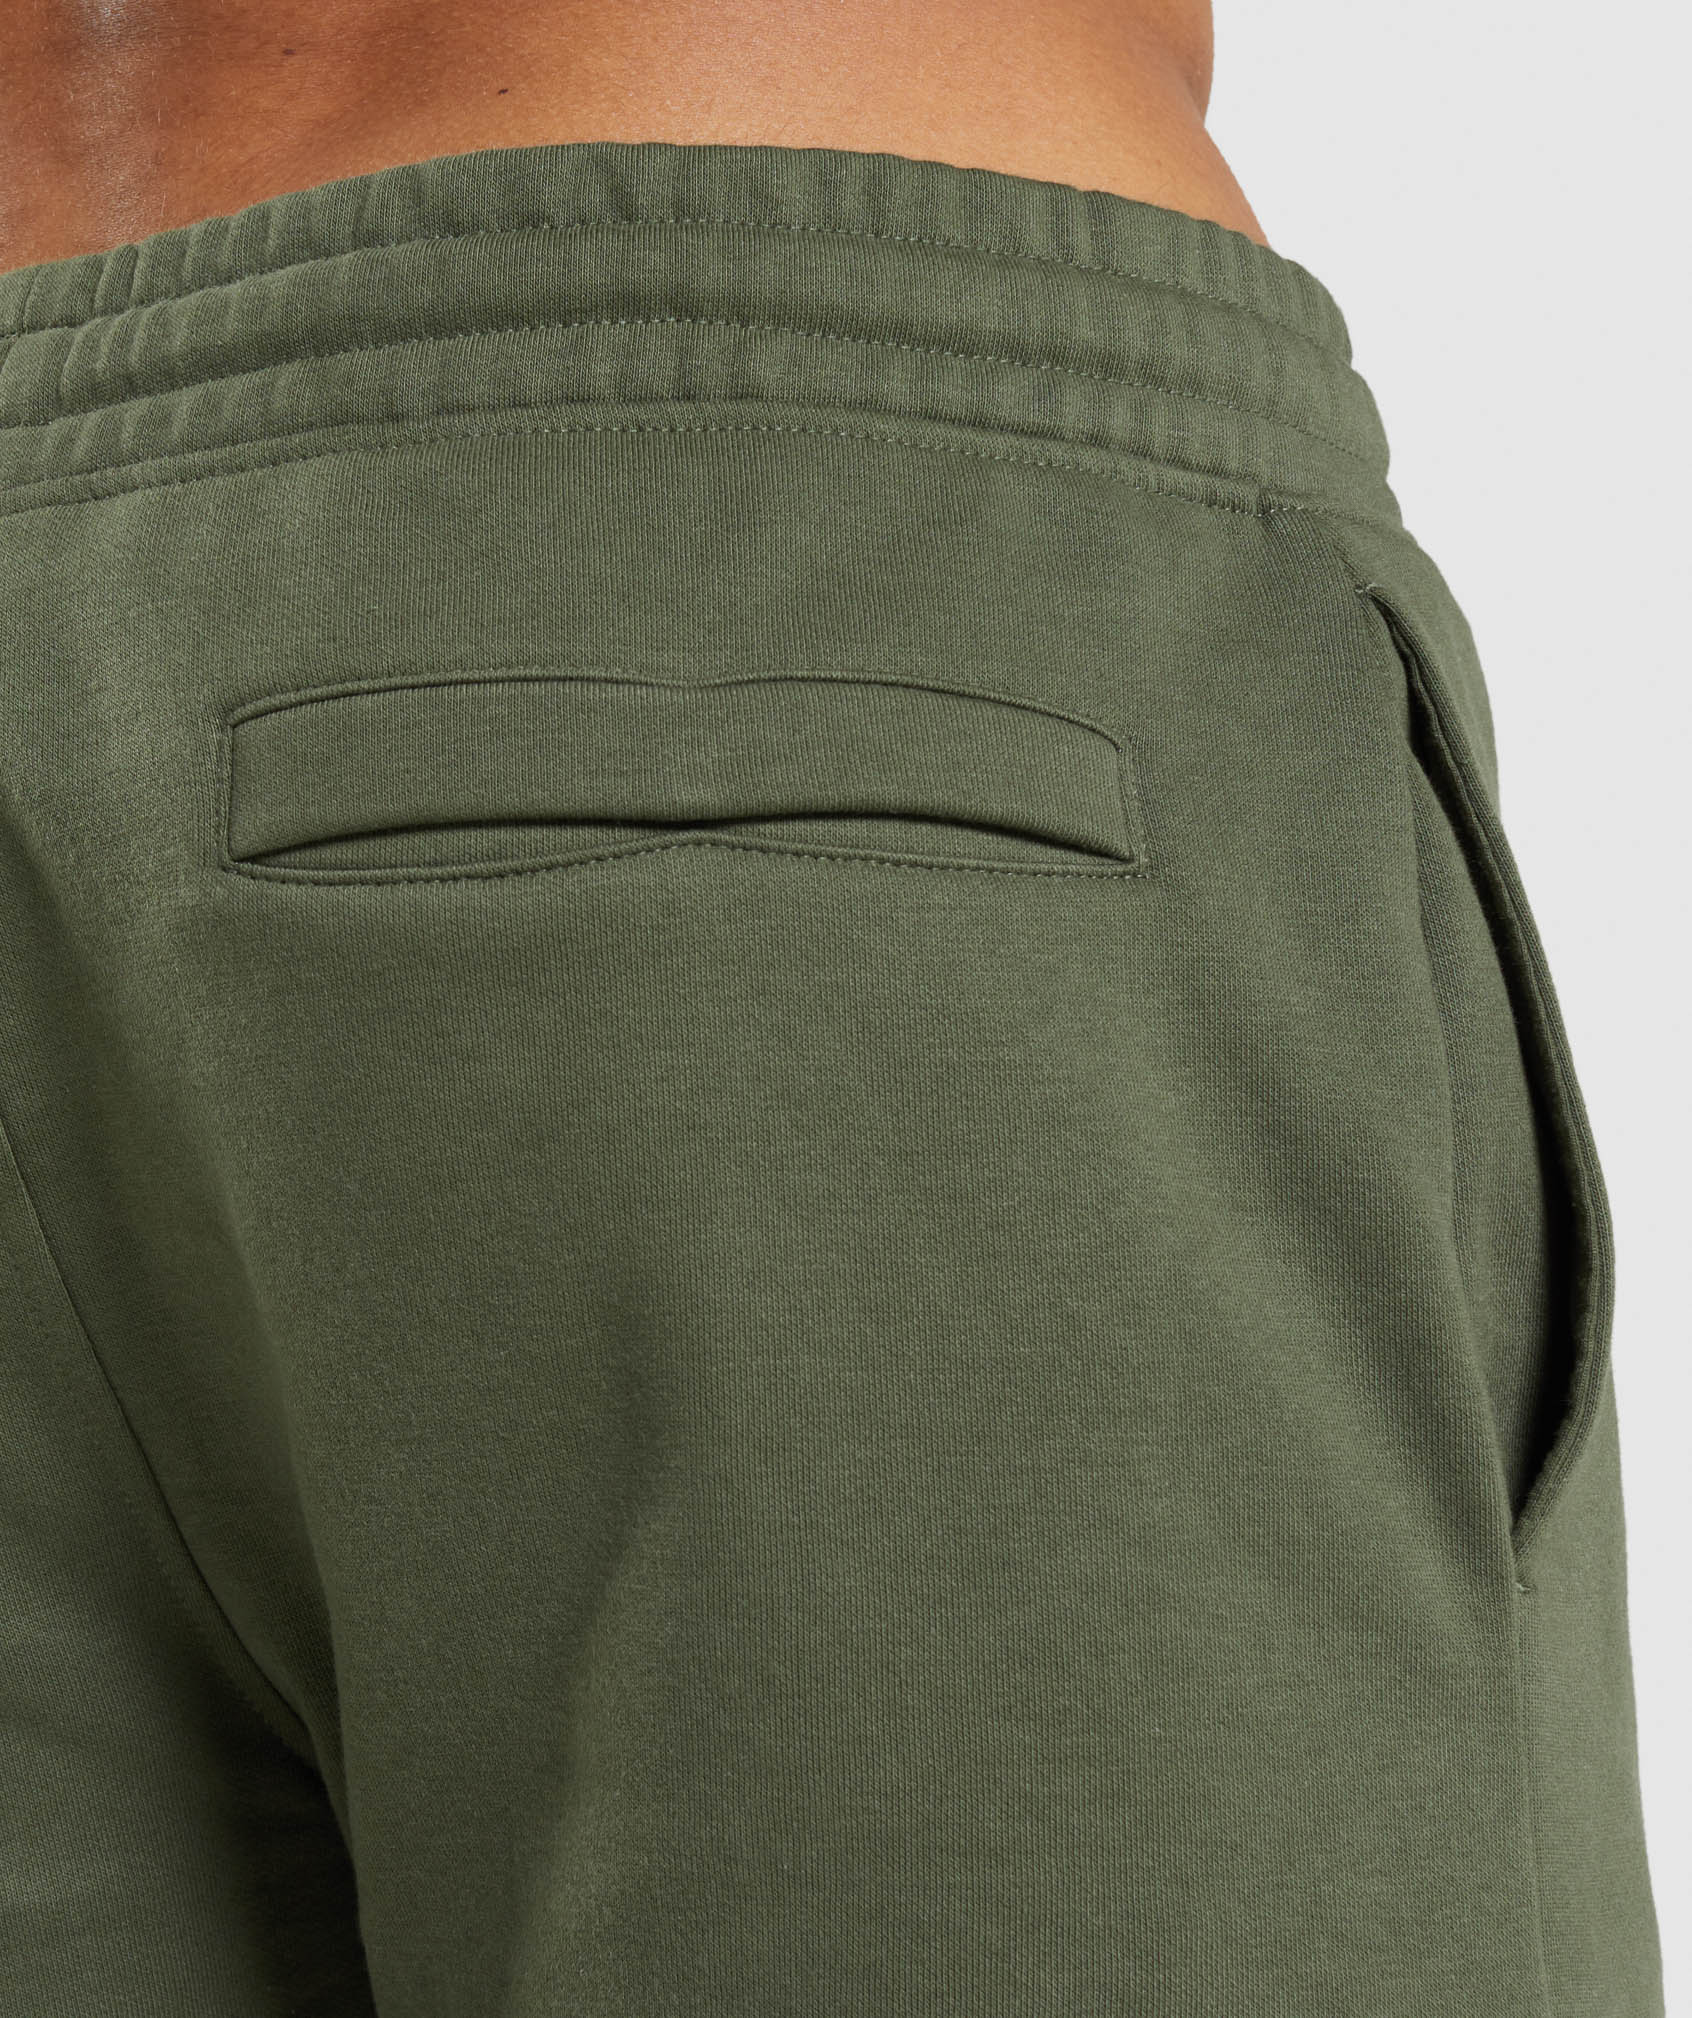 Crest Shorts in Core Olive - view 6